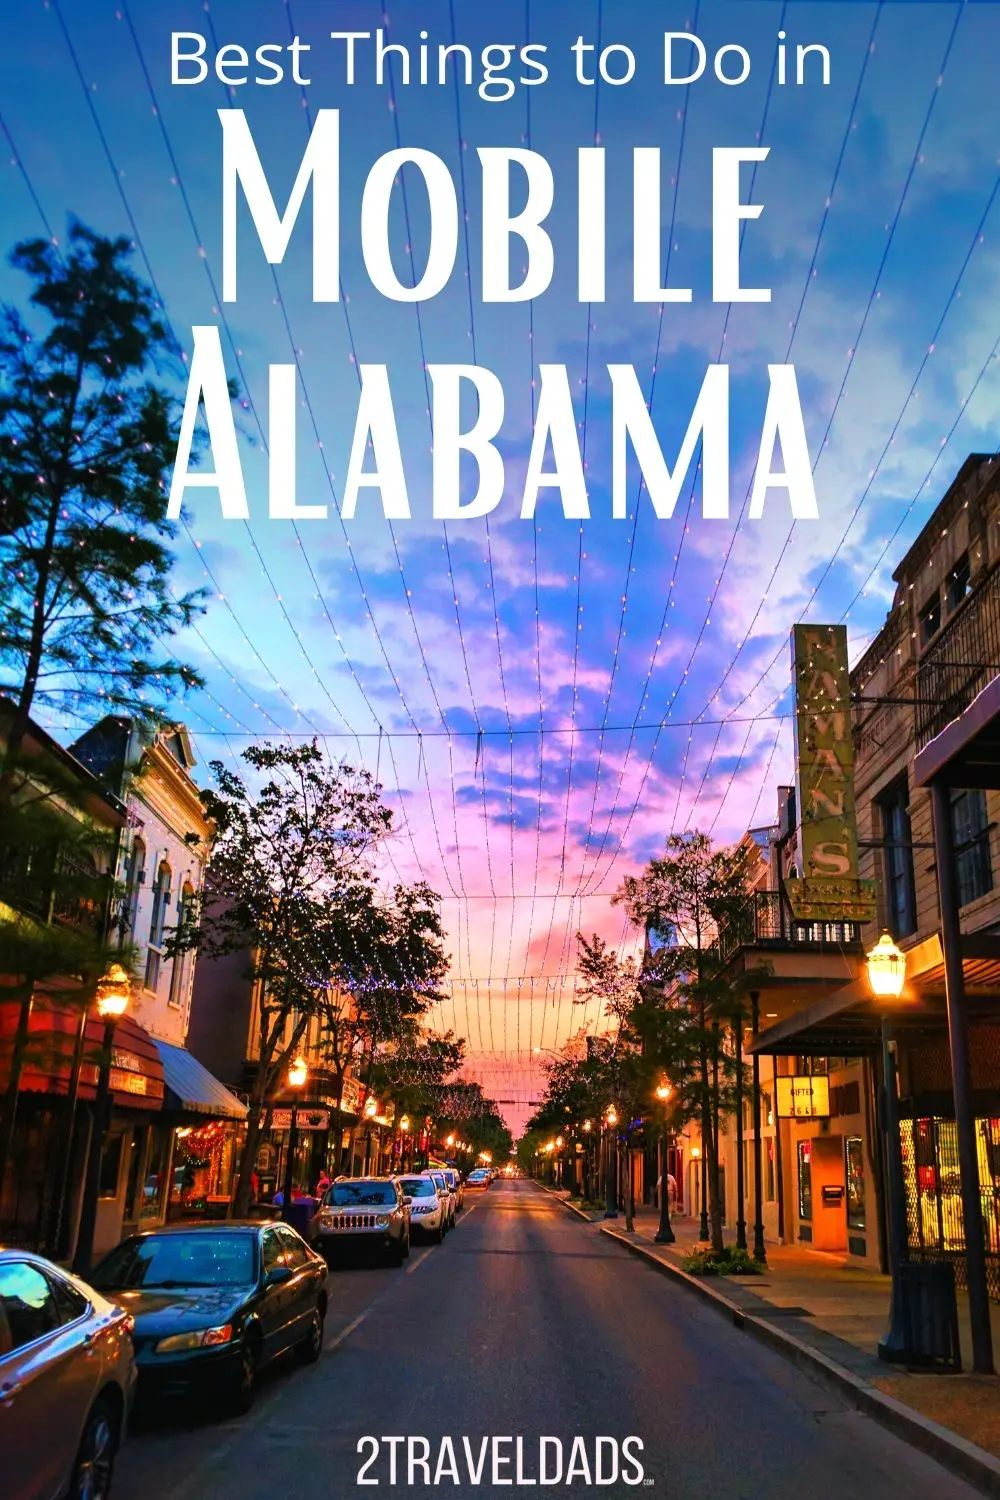 8 Things to Do in Mobile Alabama